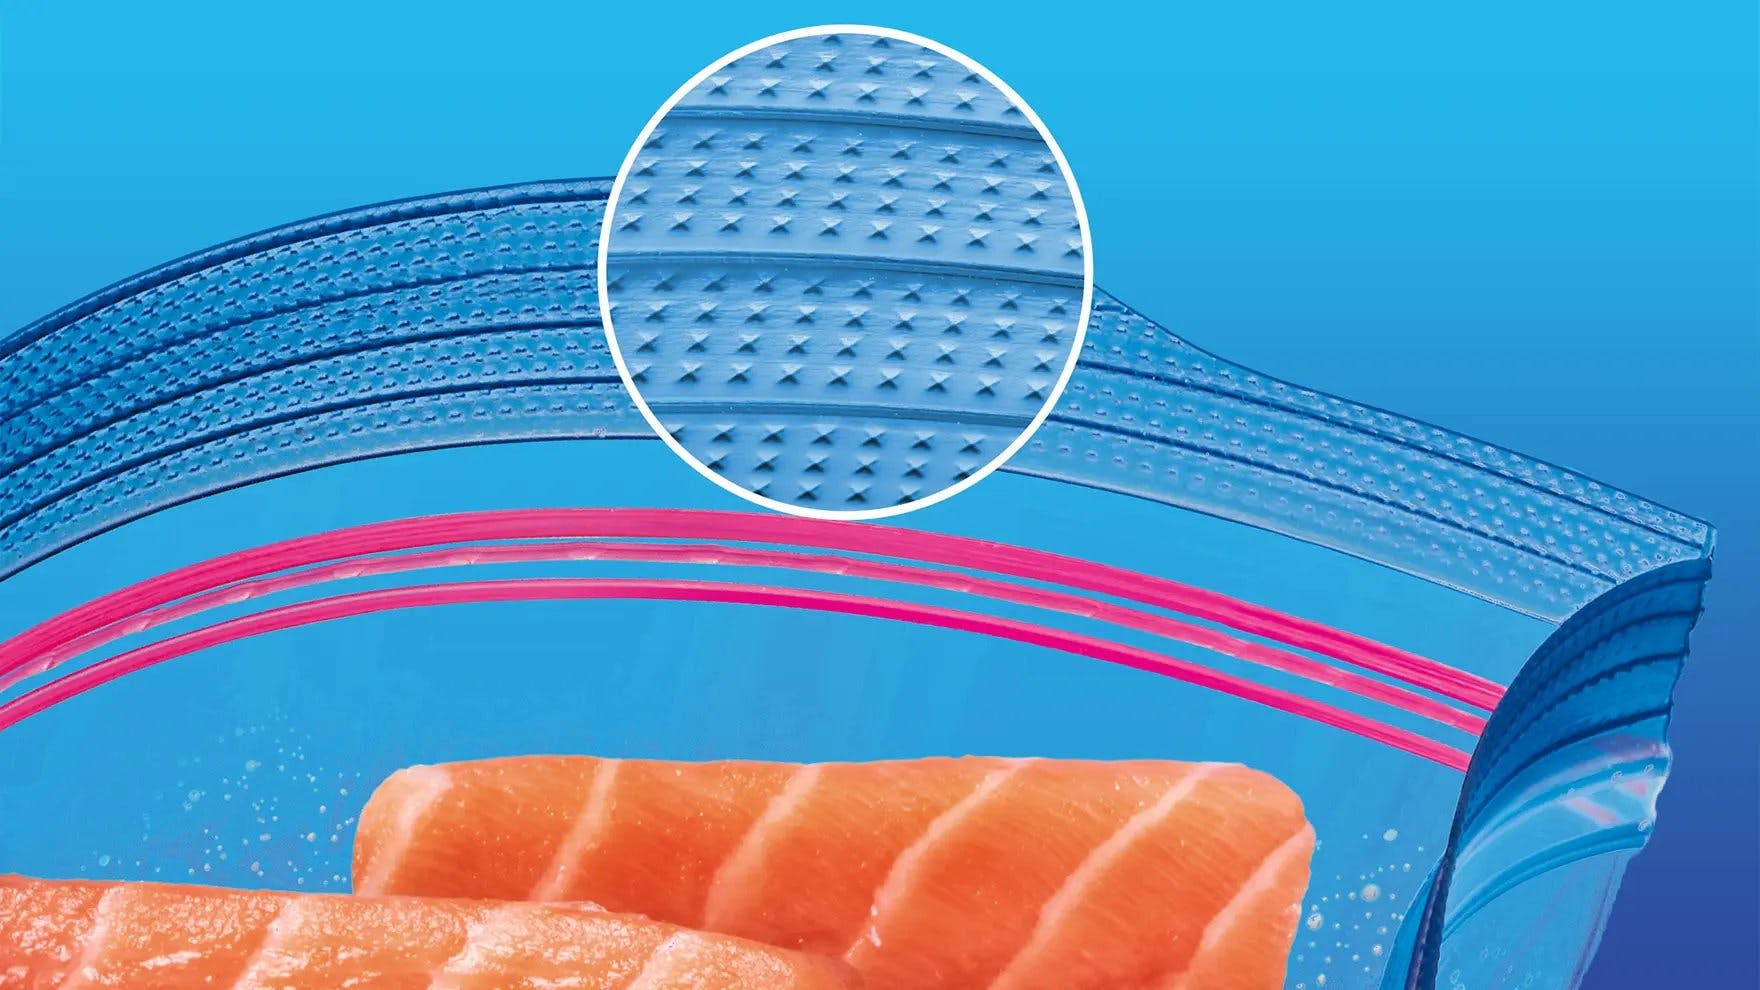 Image of a Ziploc® Freezer bag zoomed in with a focus on the Easy Grip Texture and Double Zipper